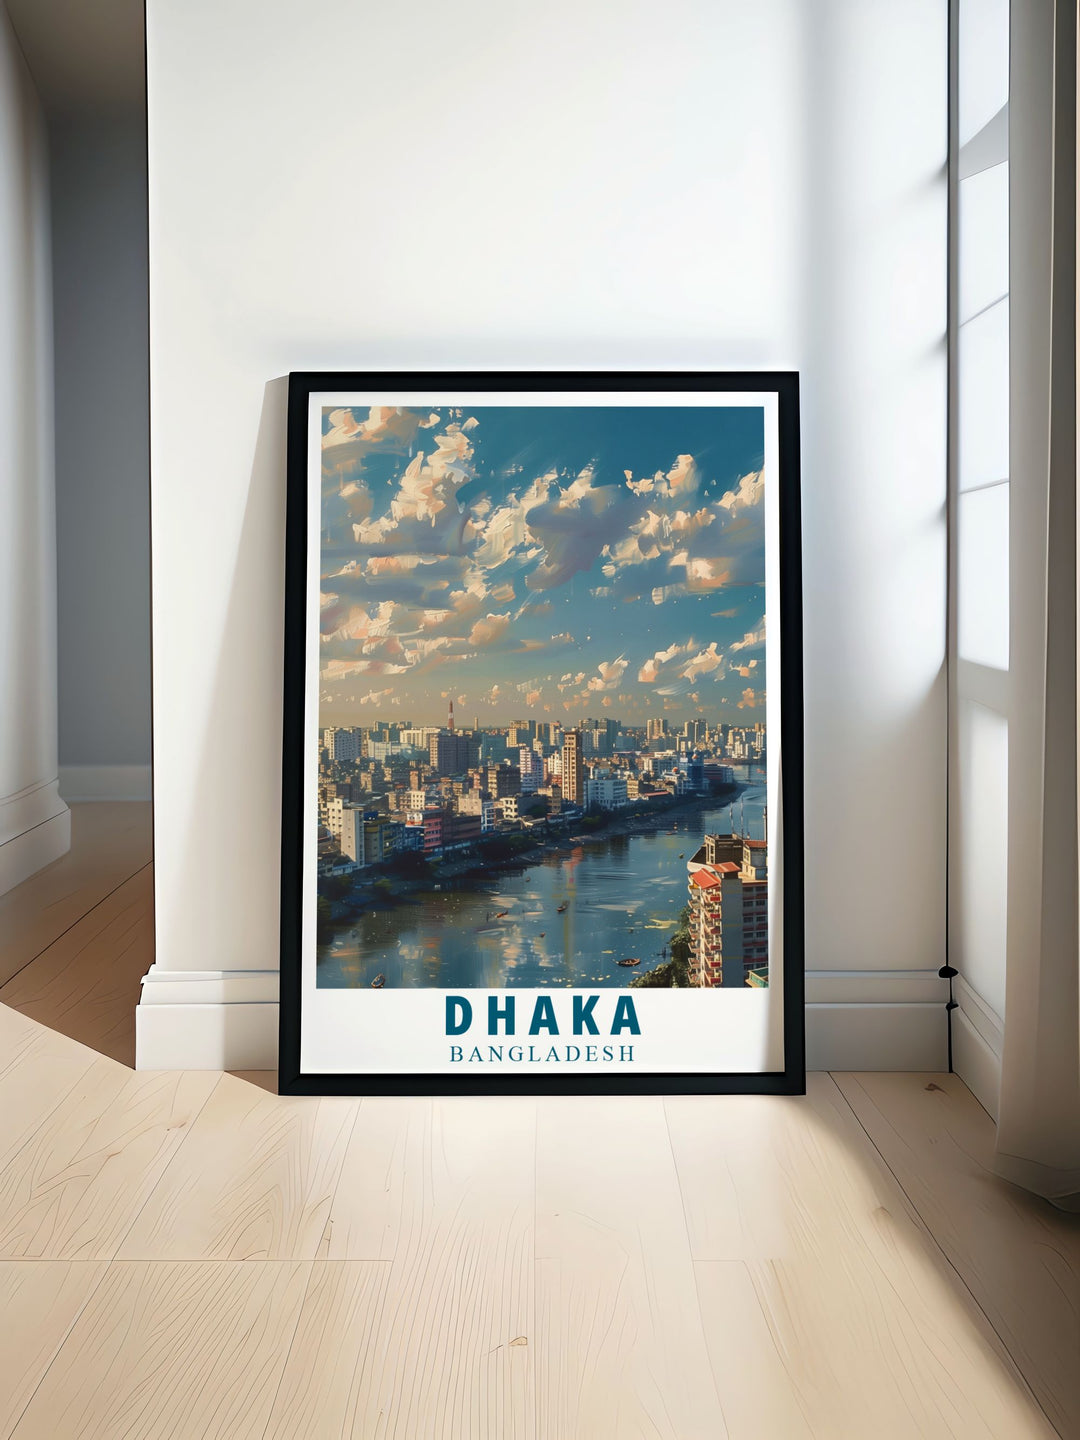 A vibrant Dhaka Travel Poster capturing the bustling streets and cultural landmarks of Bangladesh's capital. This high quality Dhaka print is perfect for home decor and as a gift for any occasion, bringing the essence of Dhaka into your living space.